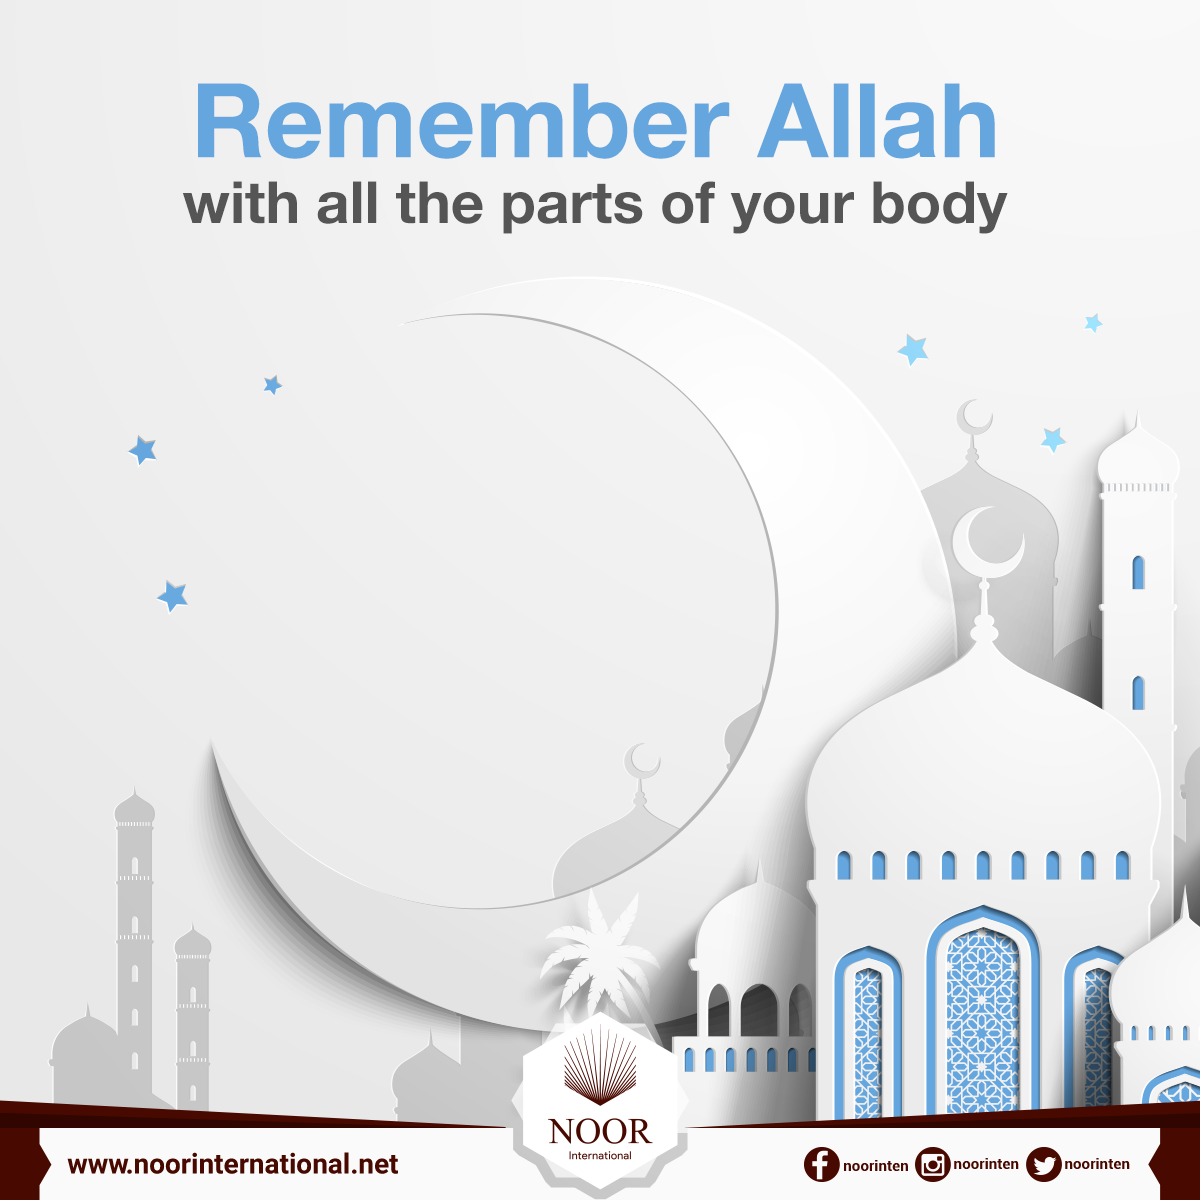 Remember Allah with all the parts of your body